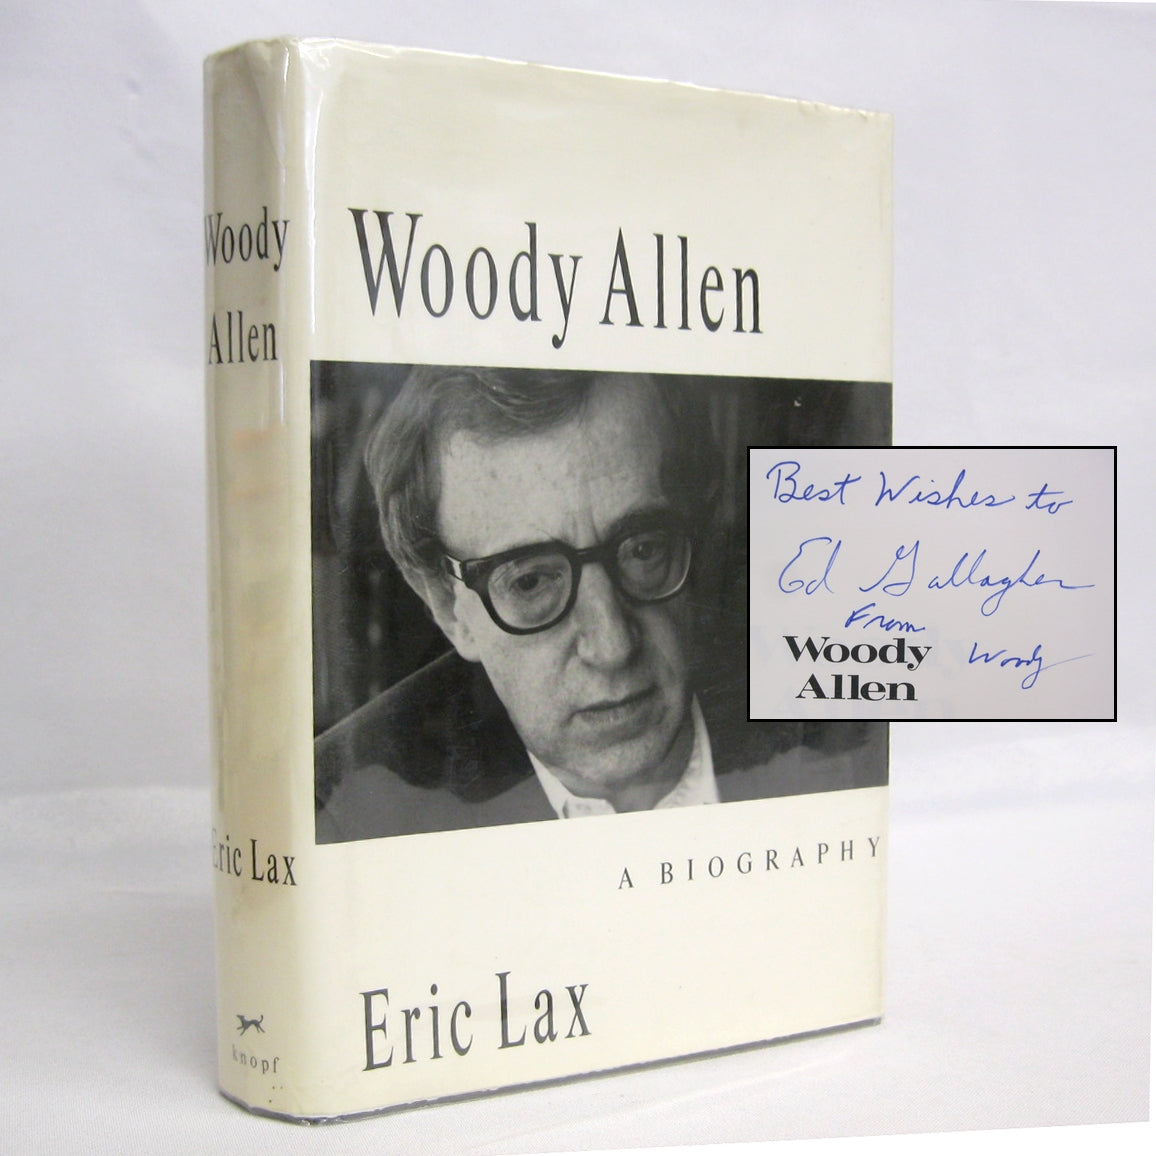 Woody Allen a Biography by Eric Lax